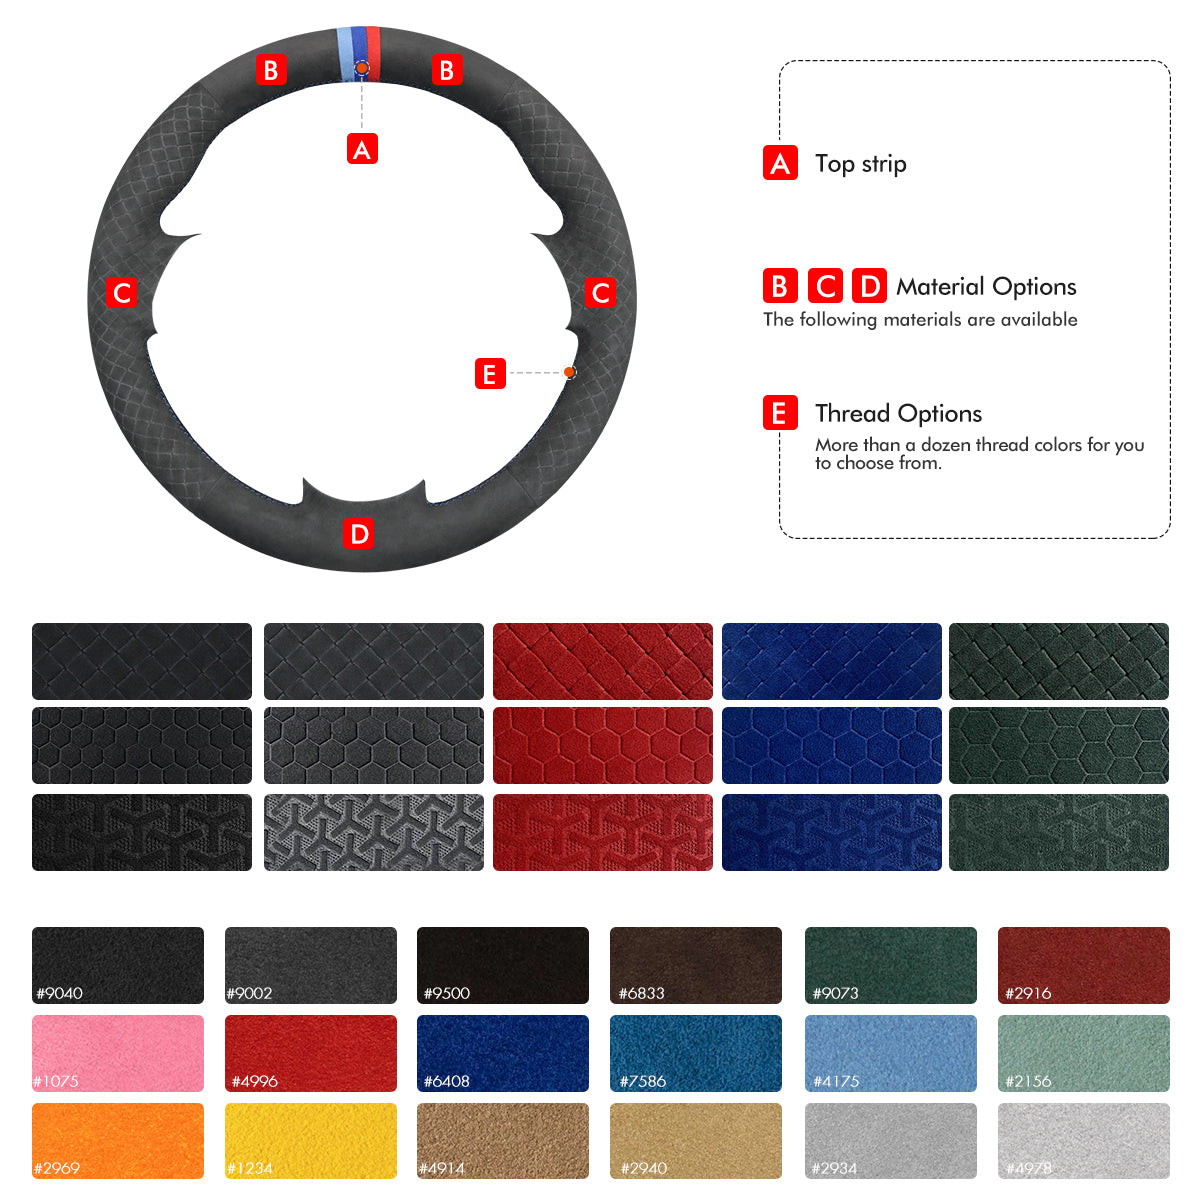 MEWANT Hand Stitch Black Suede Car Steering Wheel Cover for Kia Spectra (Spectra5) Cerato Soul